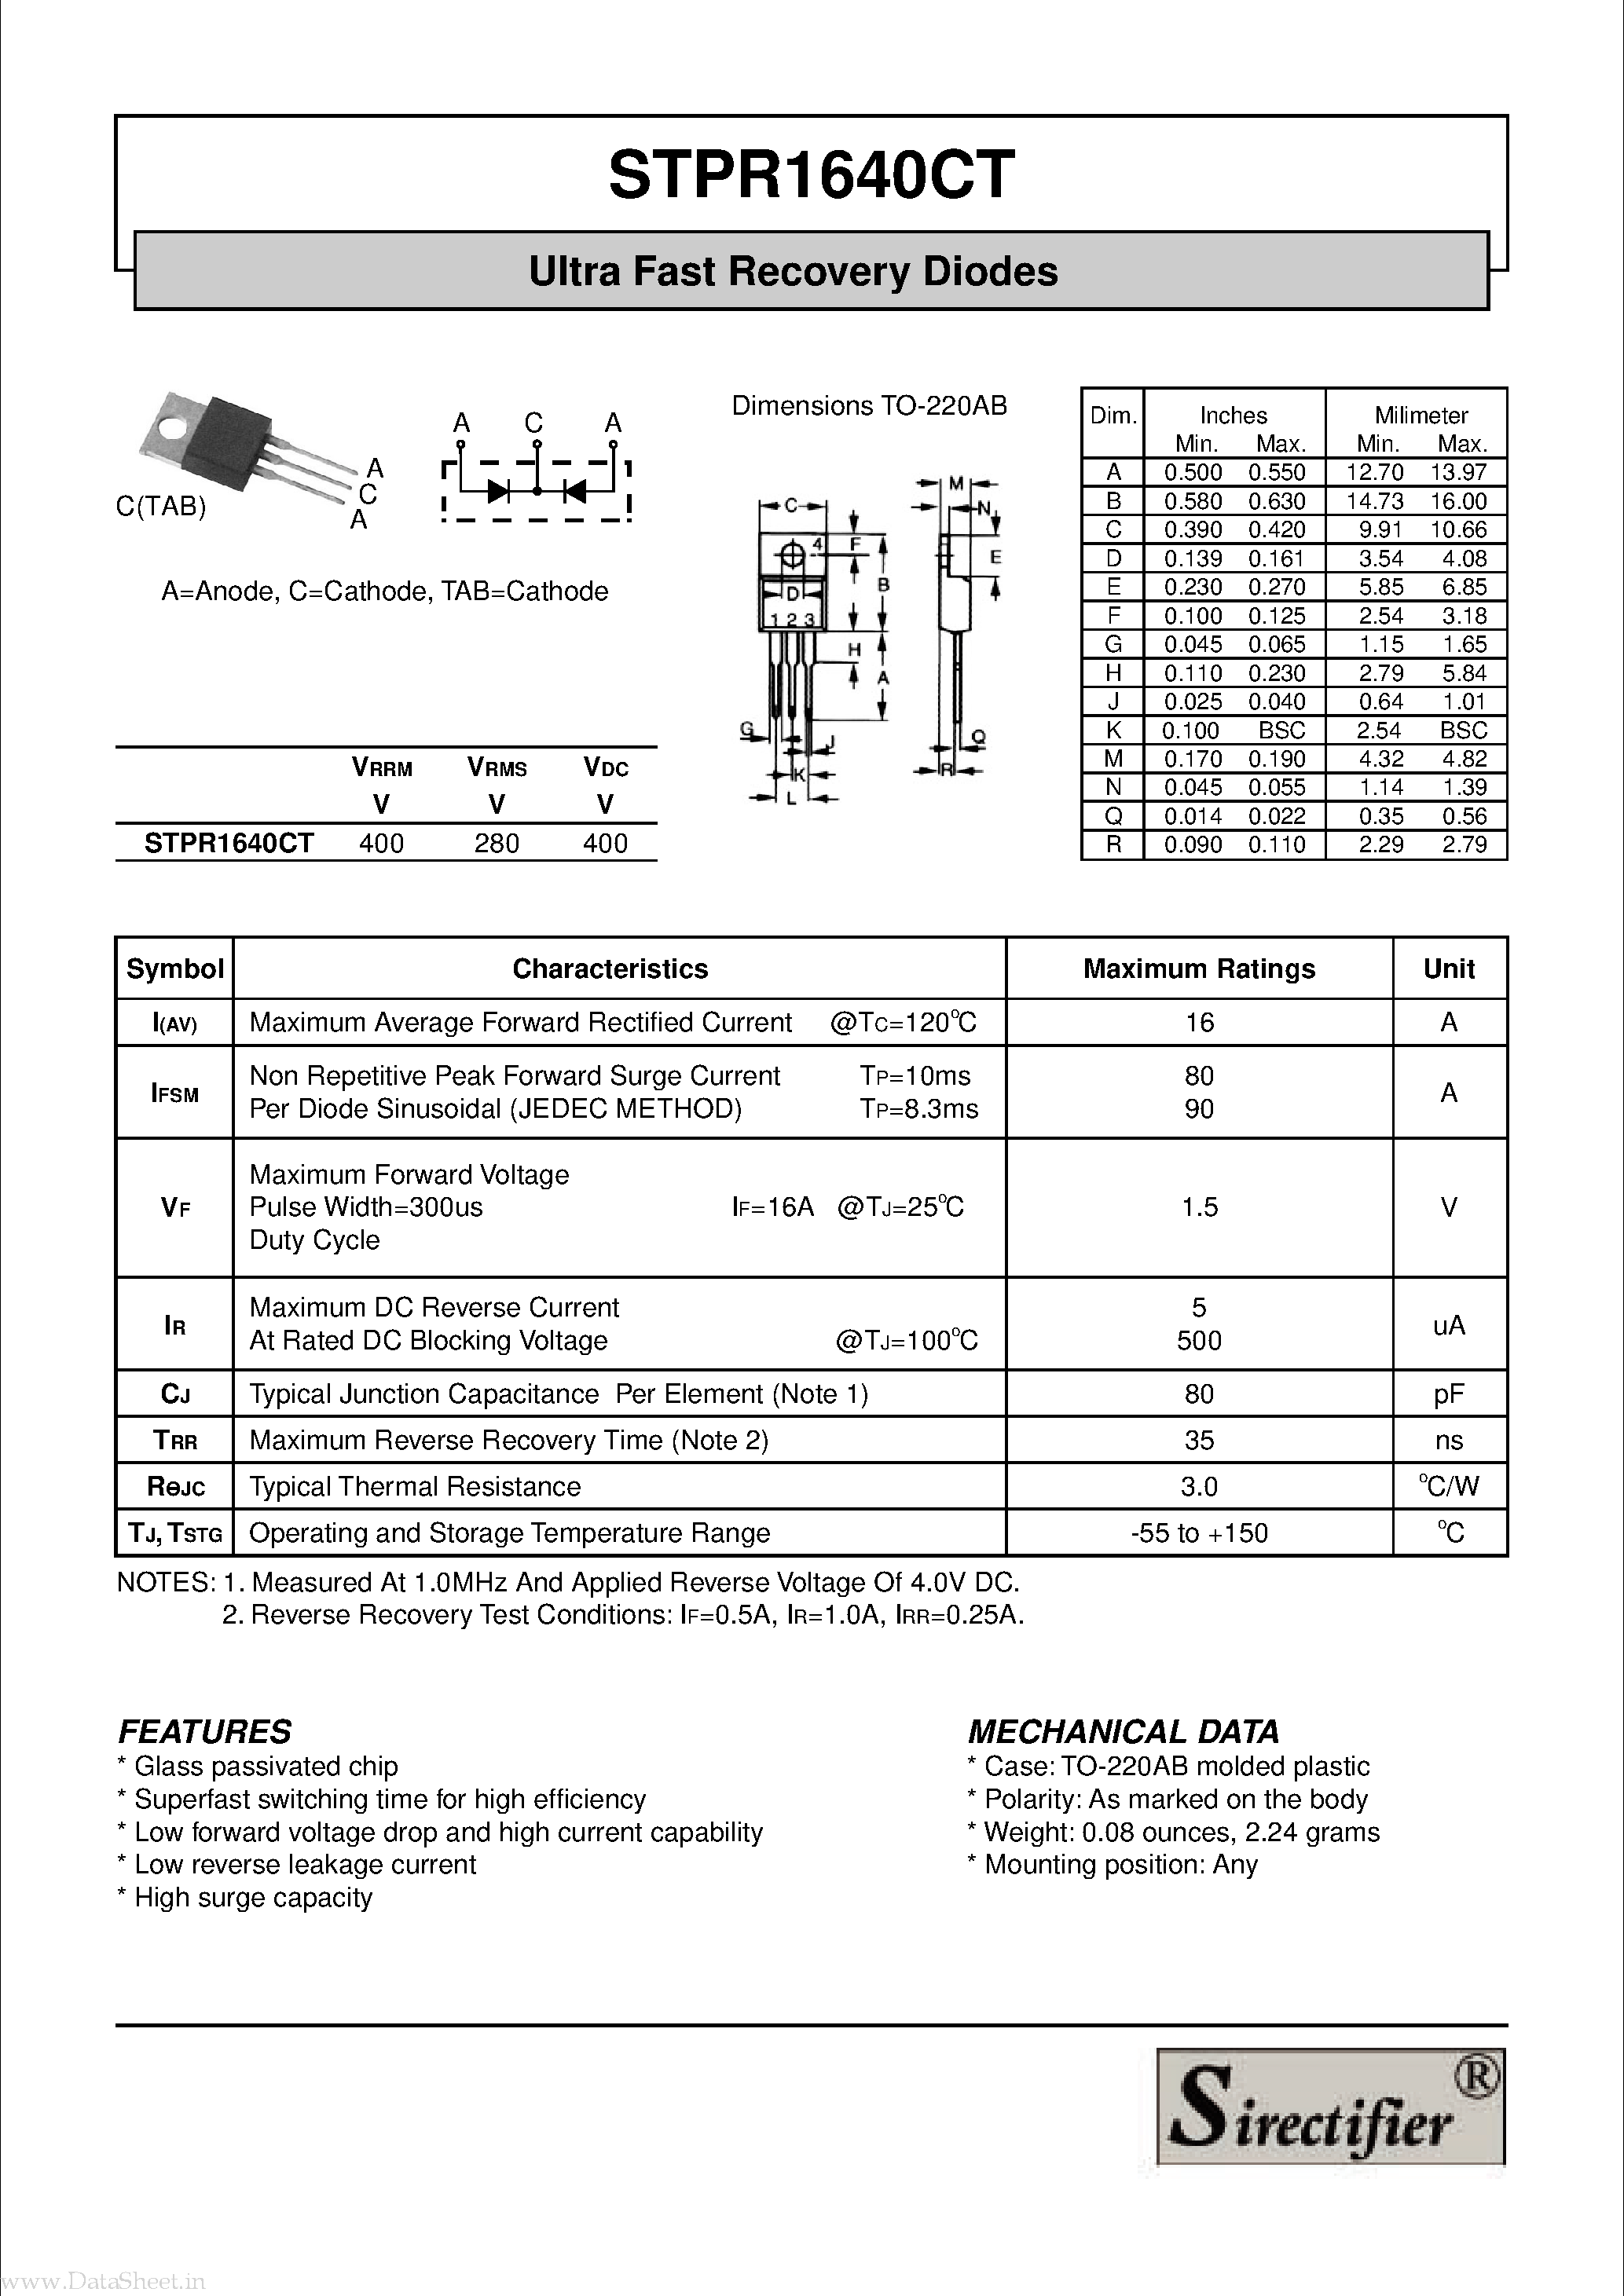 Datasheet STPR1640CT - Ultra Fast Recovery Diodes page 1